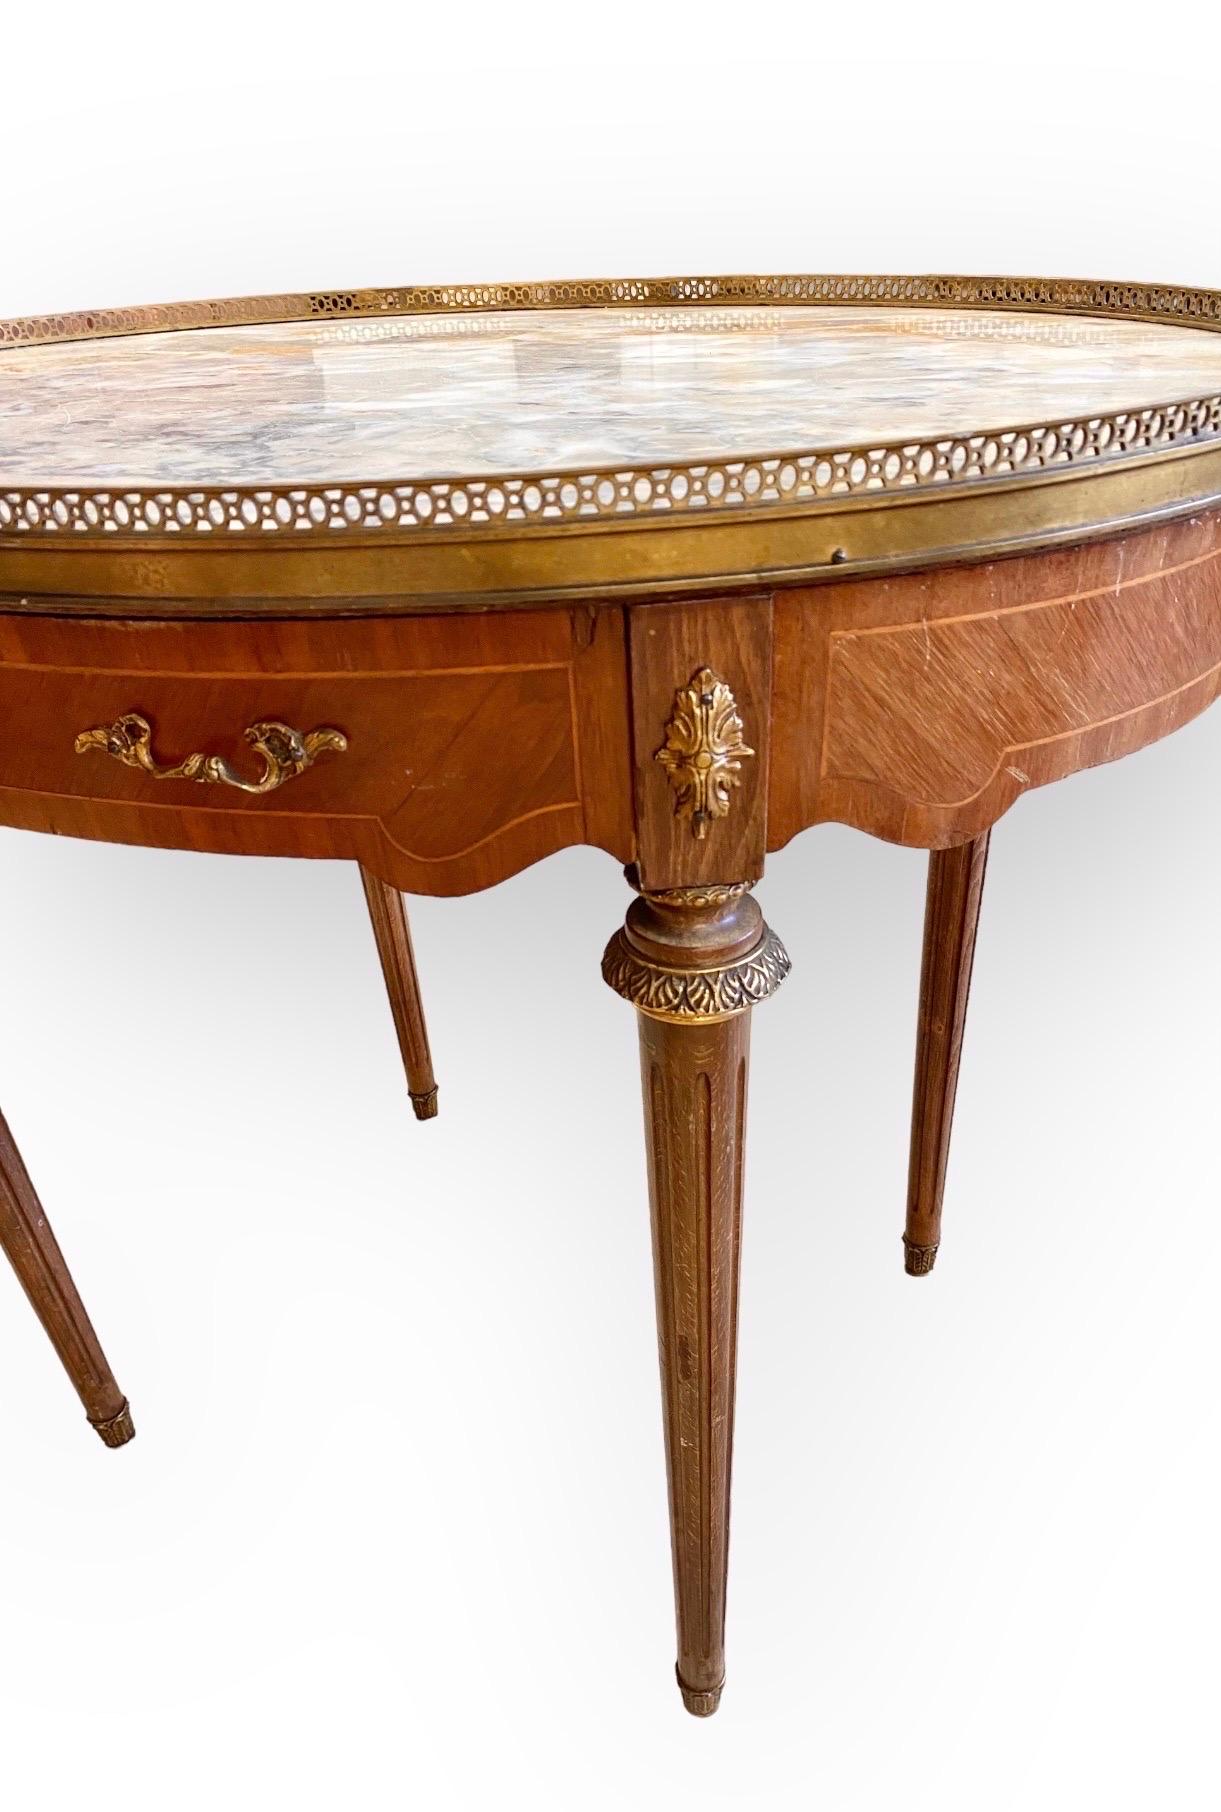 French Louis XVI Style Inlaid Carved Walnut Marble Top Bouillote Table, 20th C.  In Good Condition For Sale In New Orleans, LA